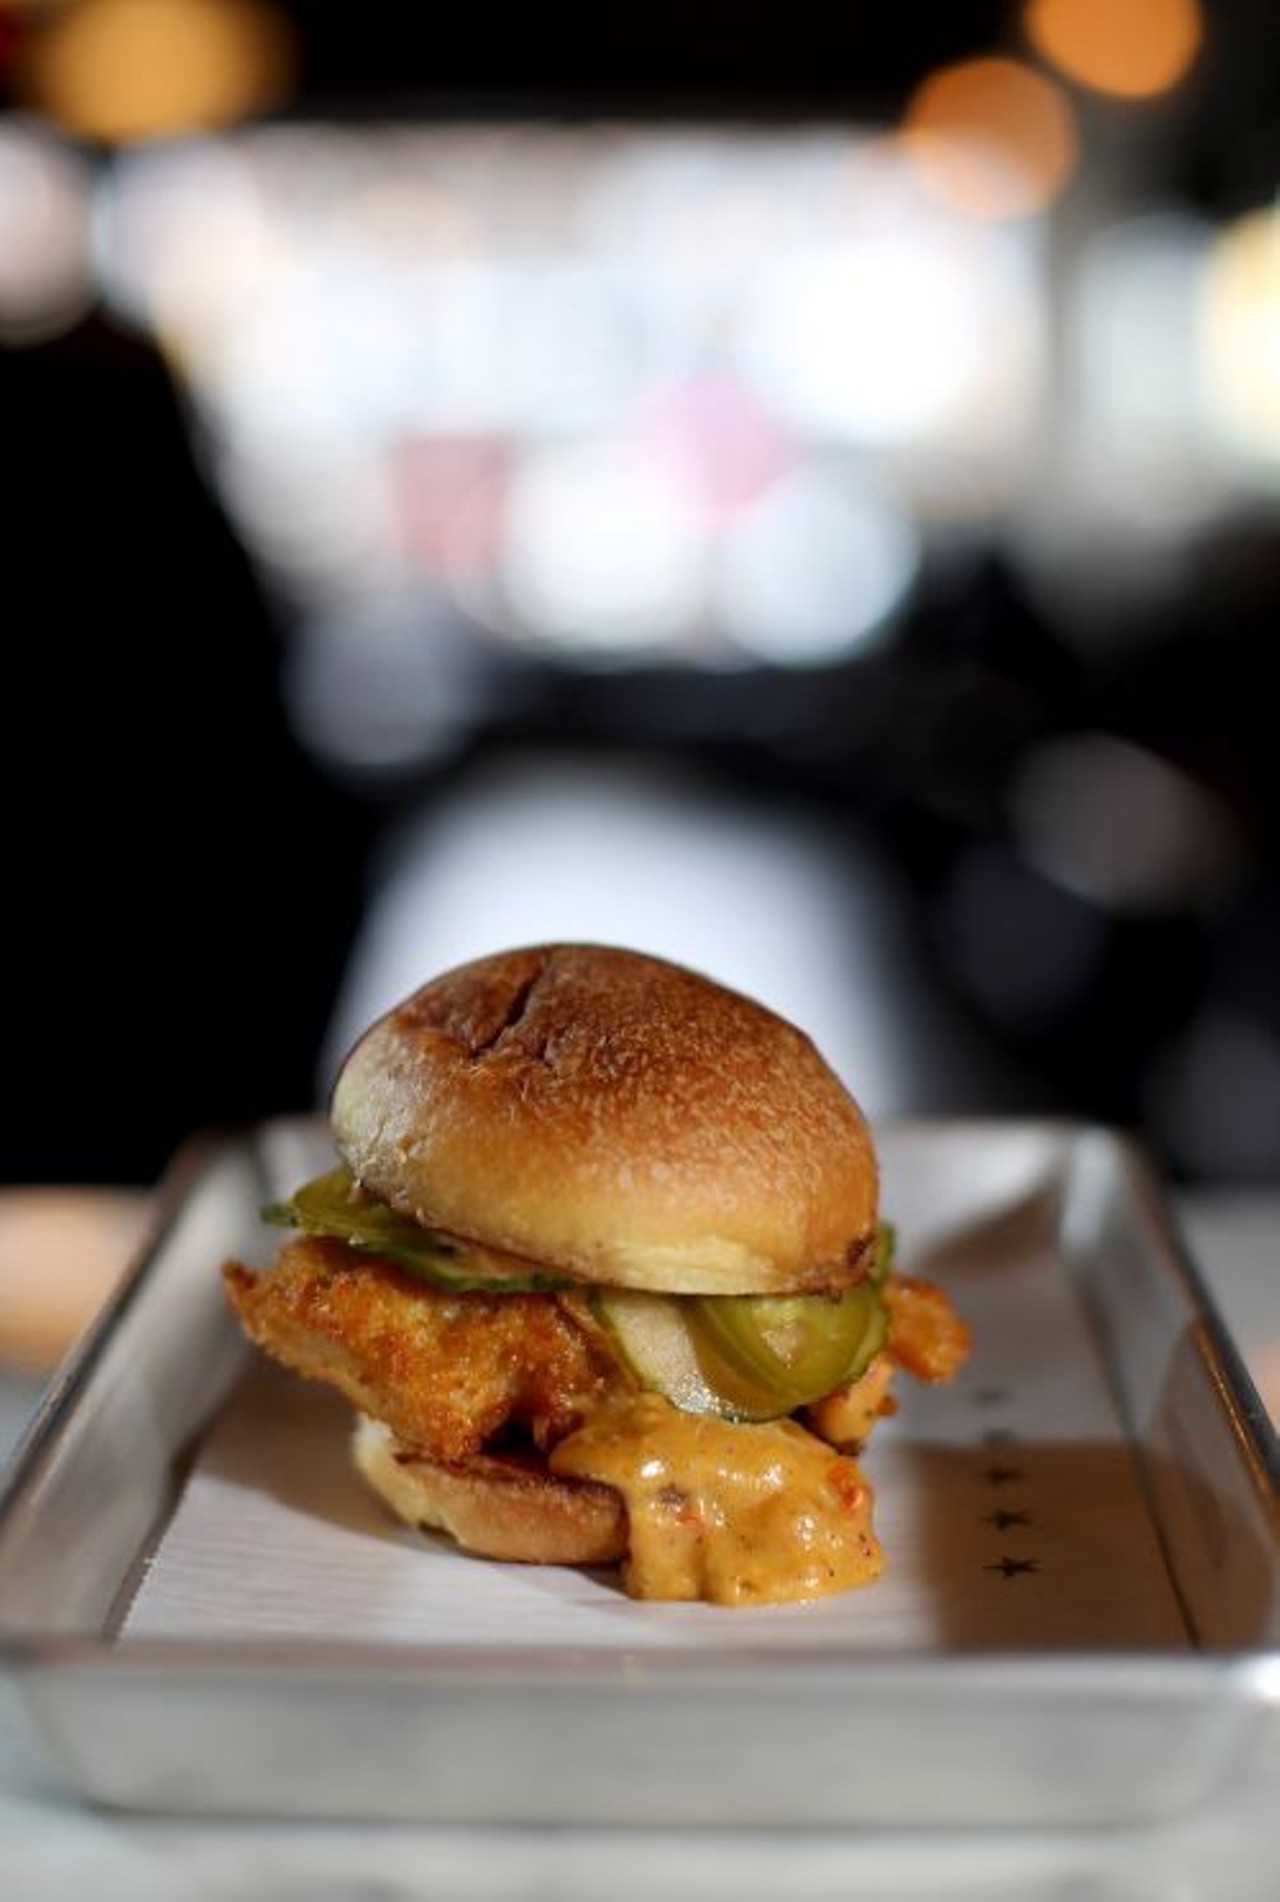 Best Sliders: Public House (Photo by Rob Widdis)